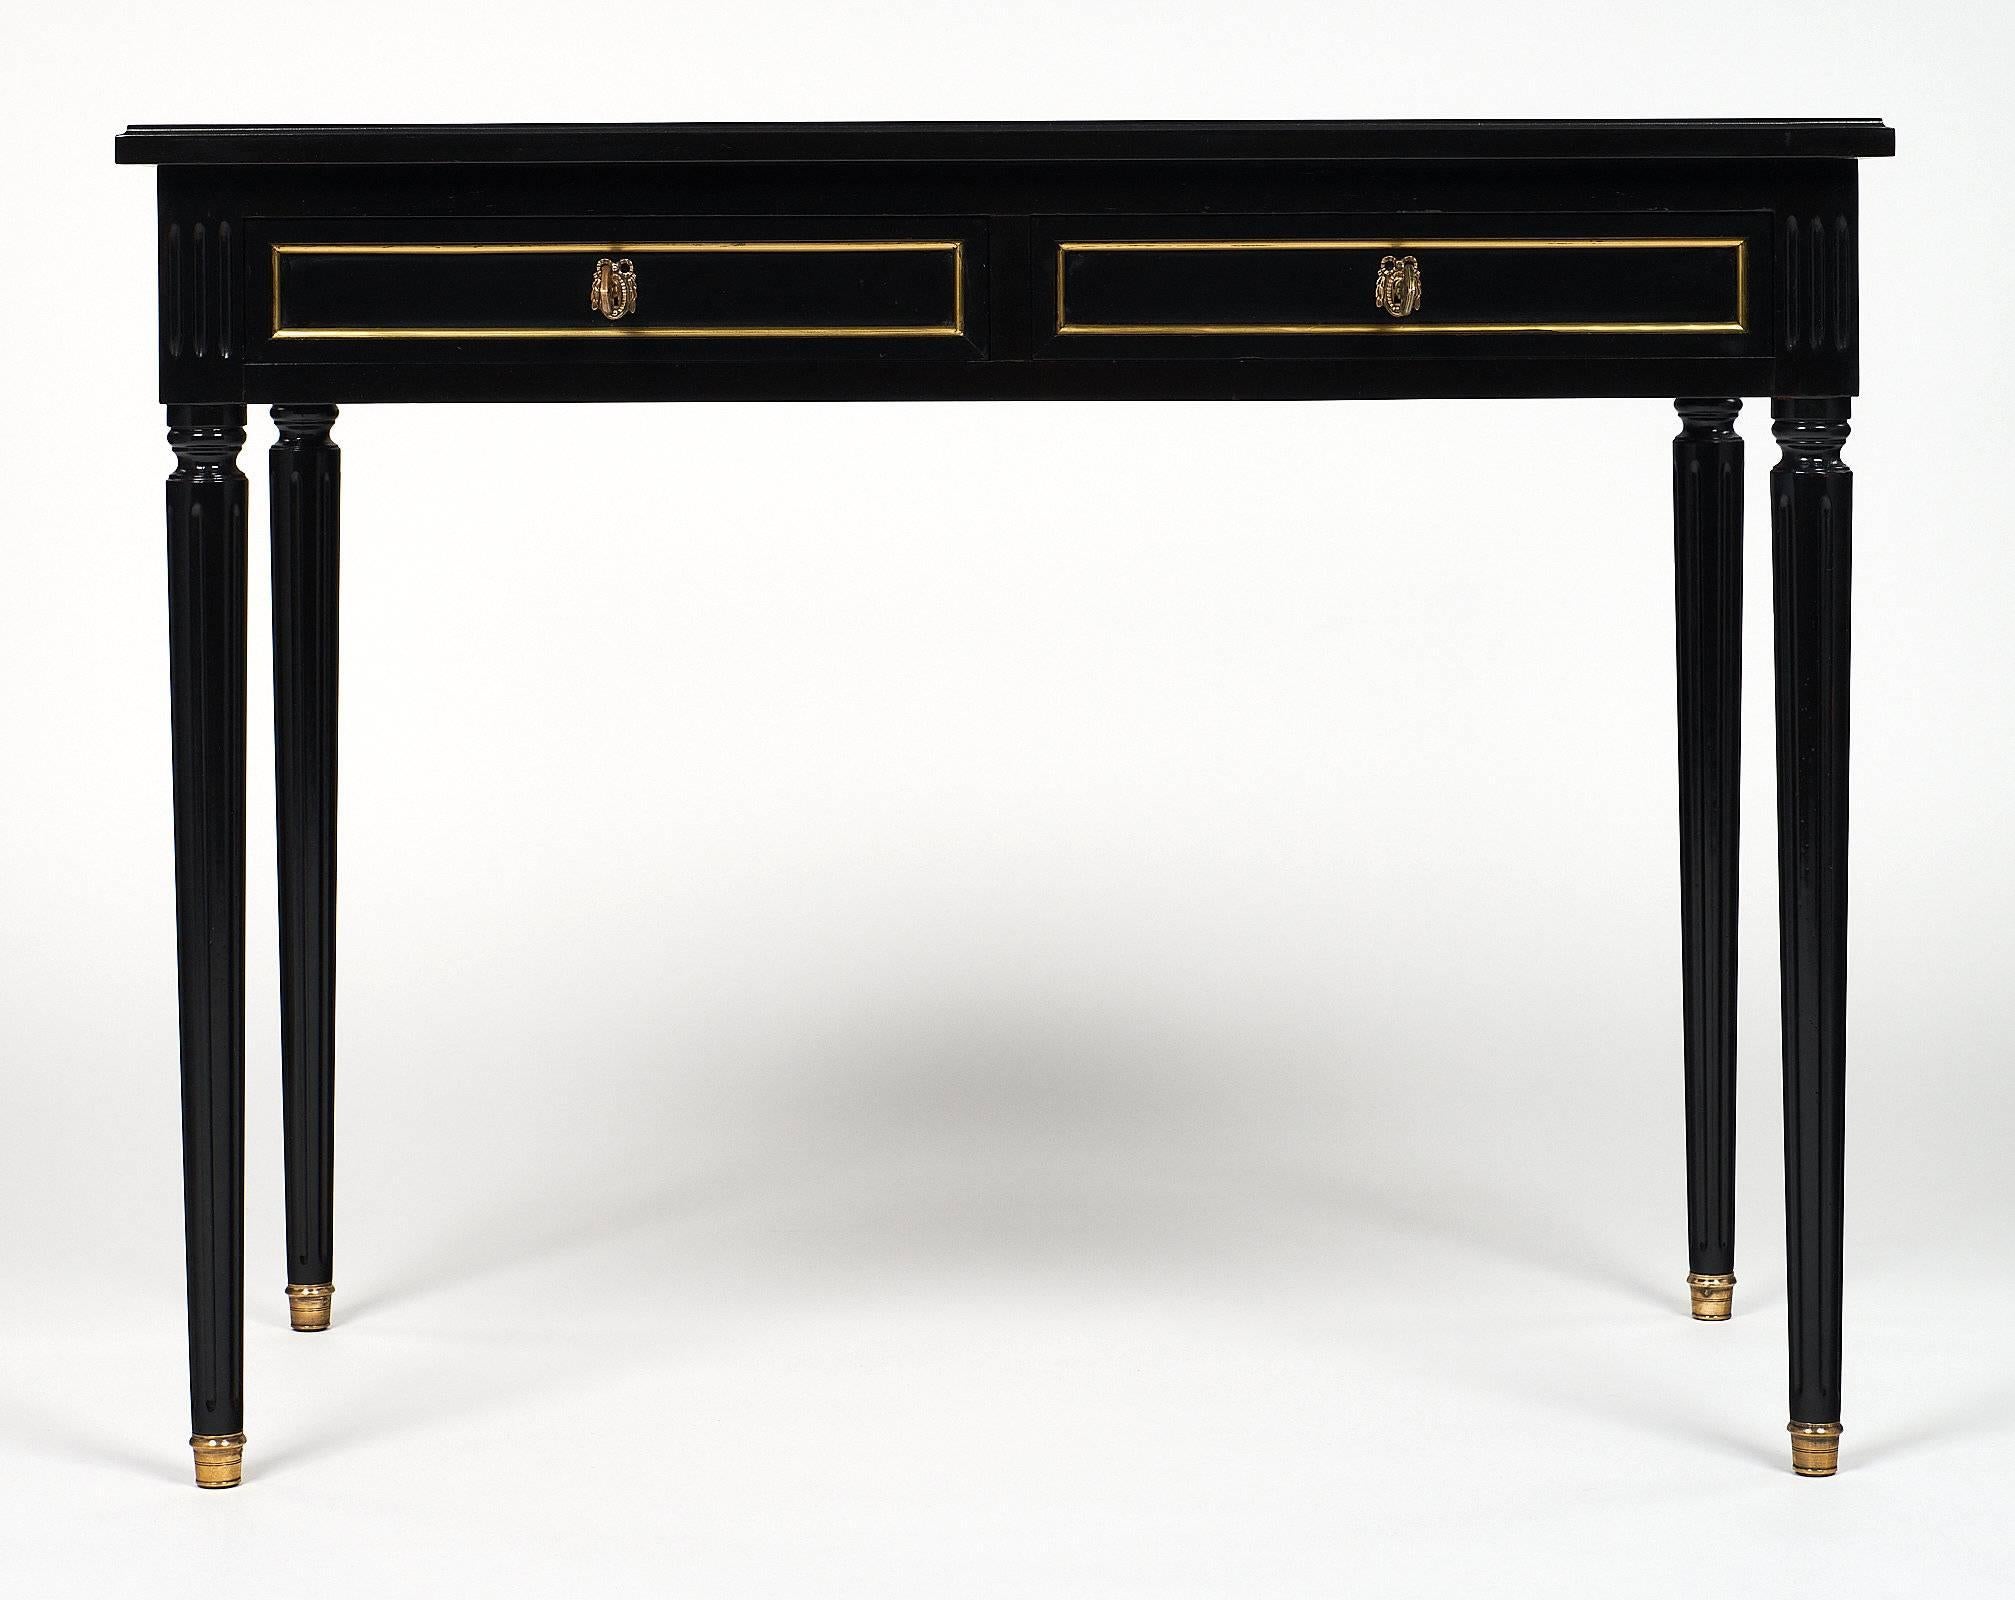 Charming French Louis XVI writing desk made of mahogany, sitting on four tapered and fluted legs. The wood has been ebonized and finished with a lustrous French polish. The top and extensions are covered with a rich Moroccan leather original to the